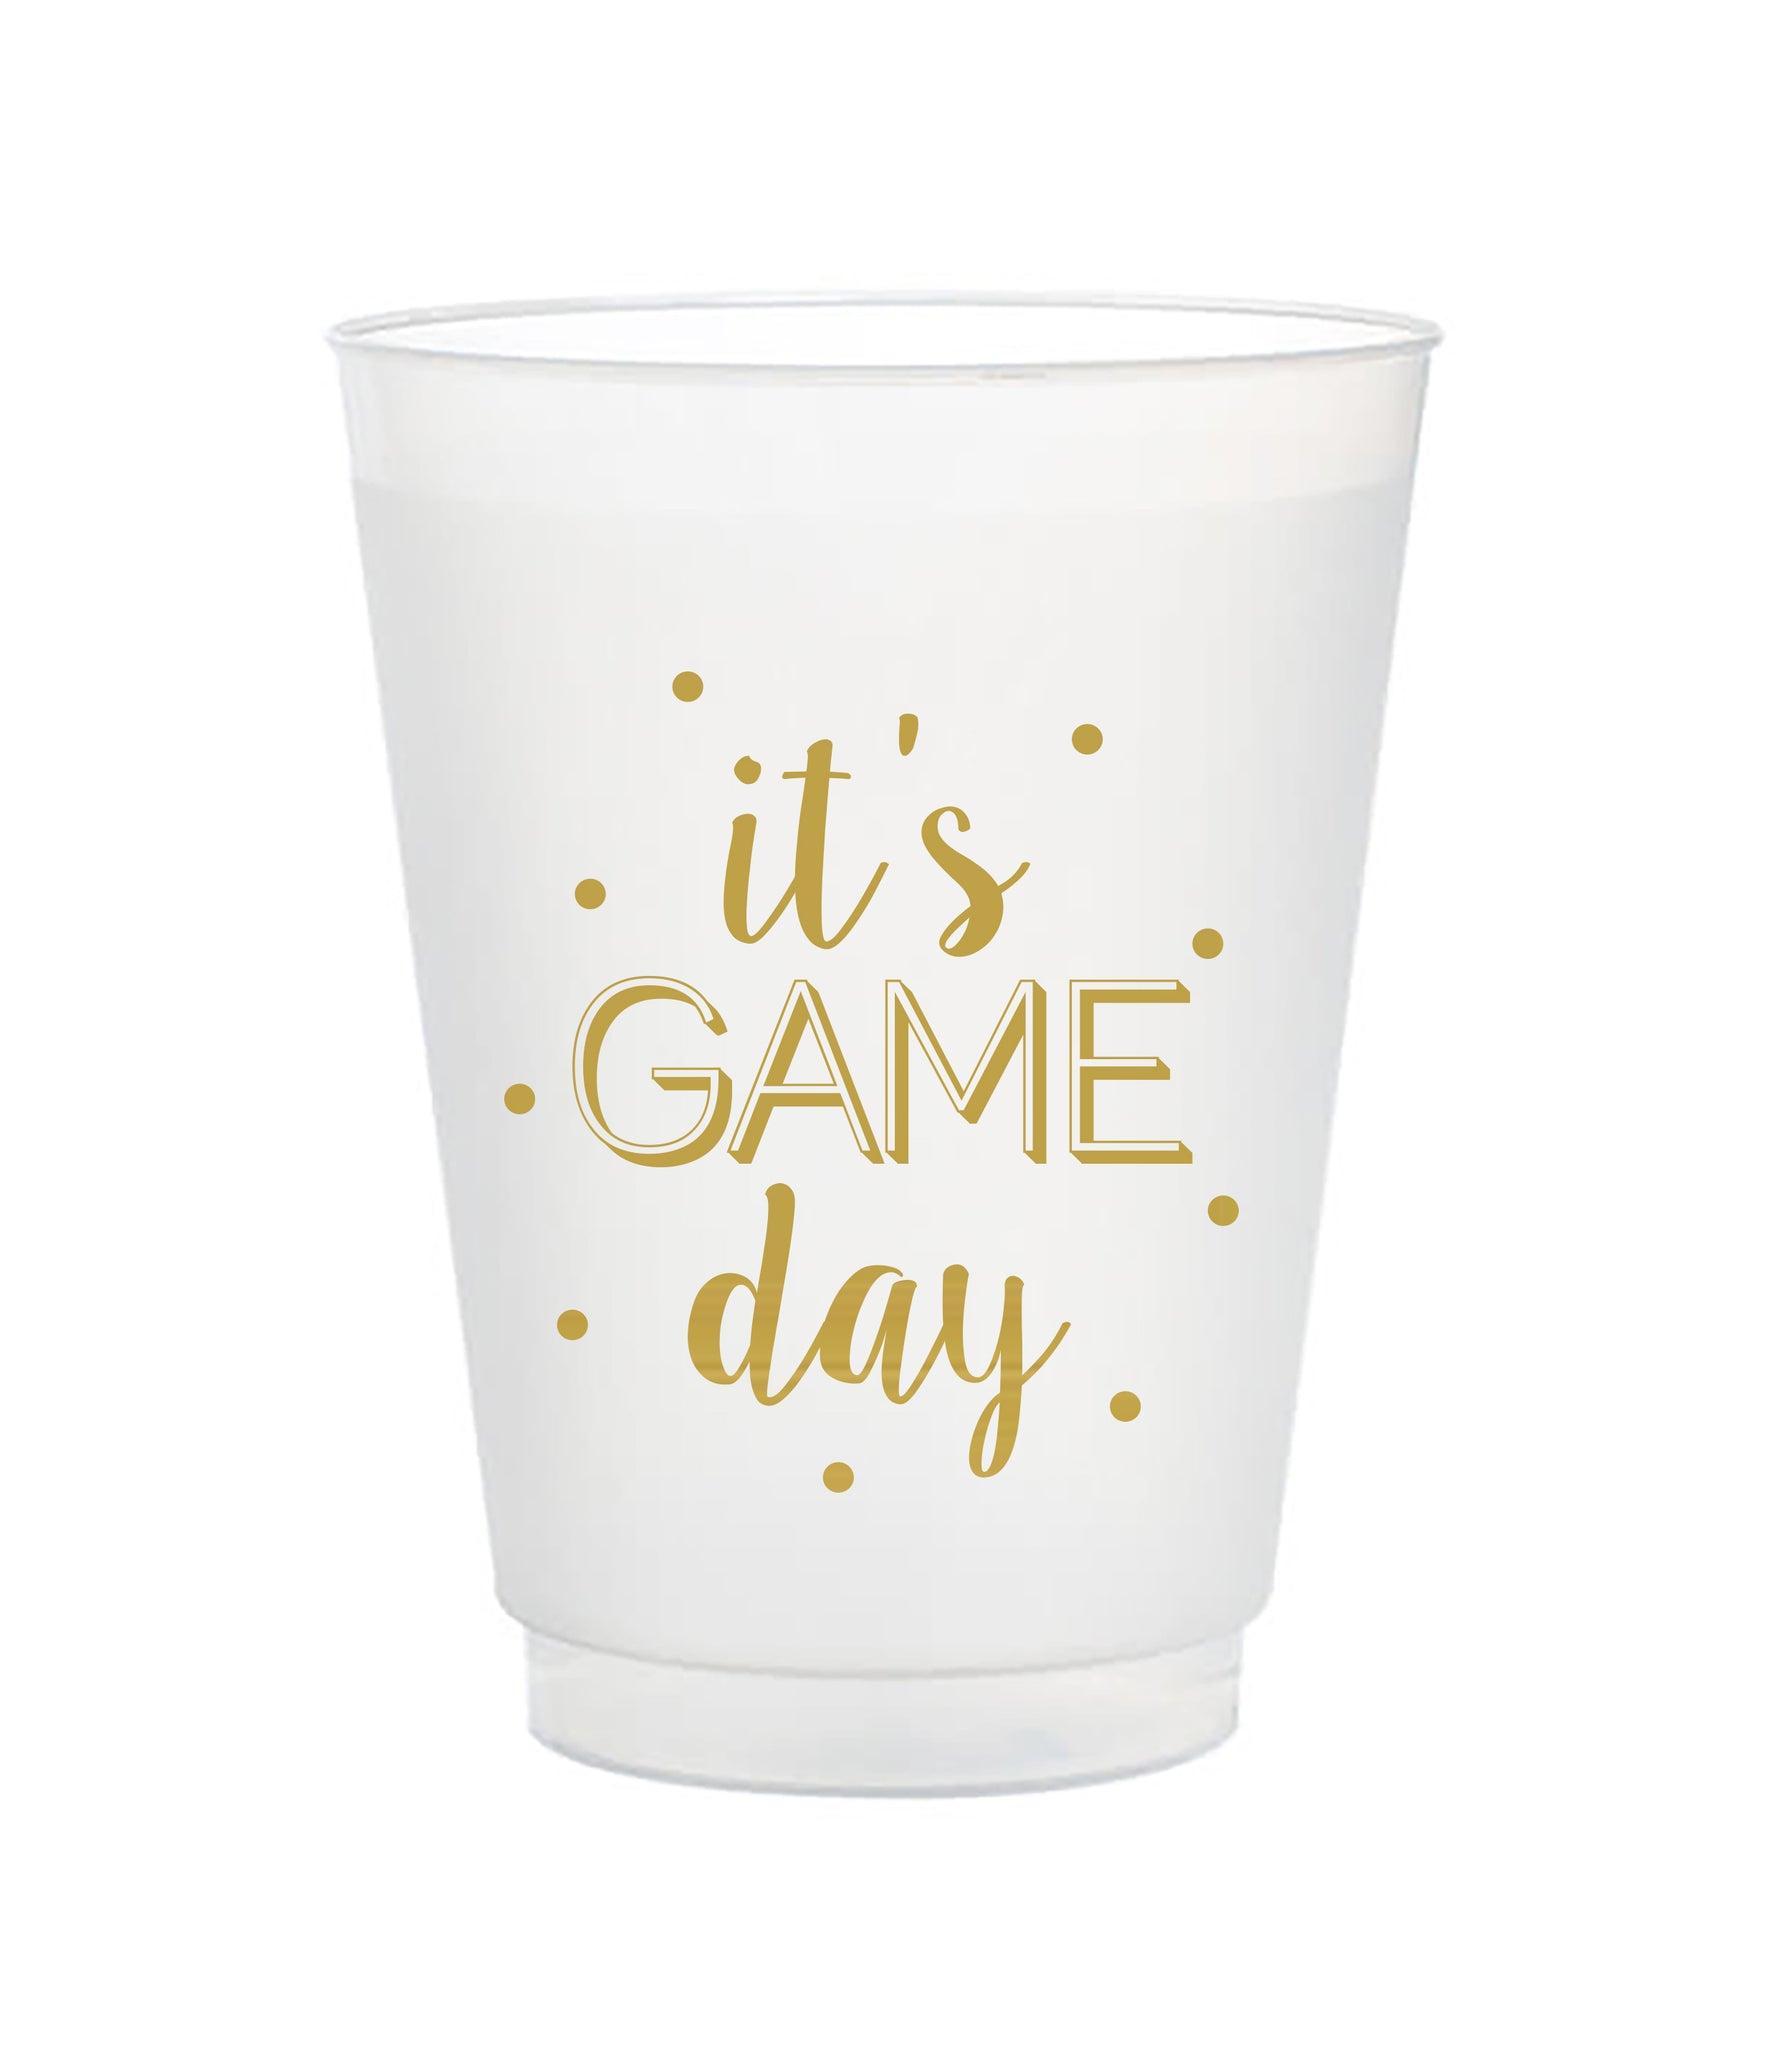 it's game day cups 